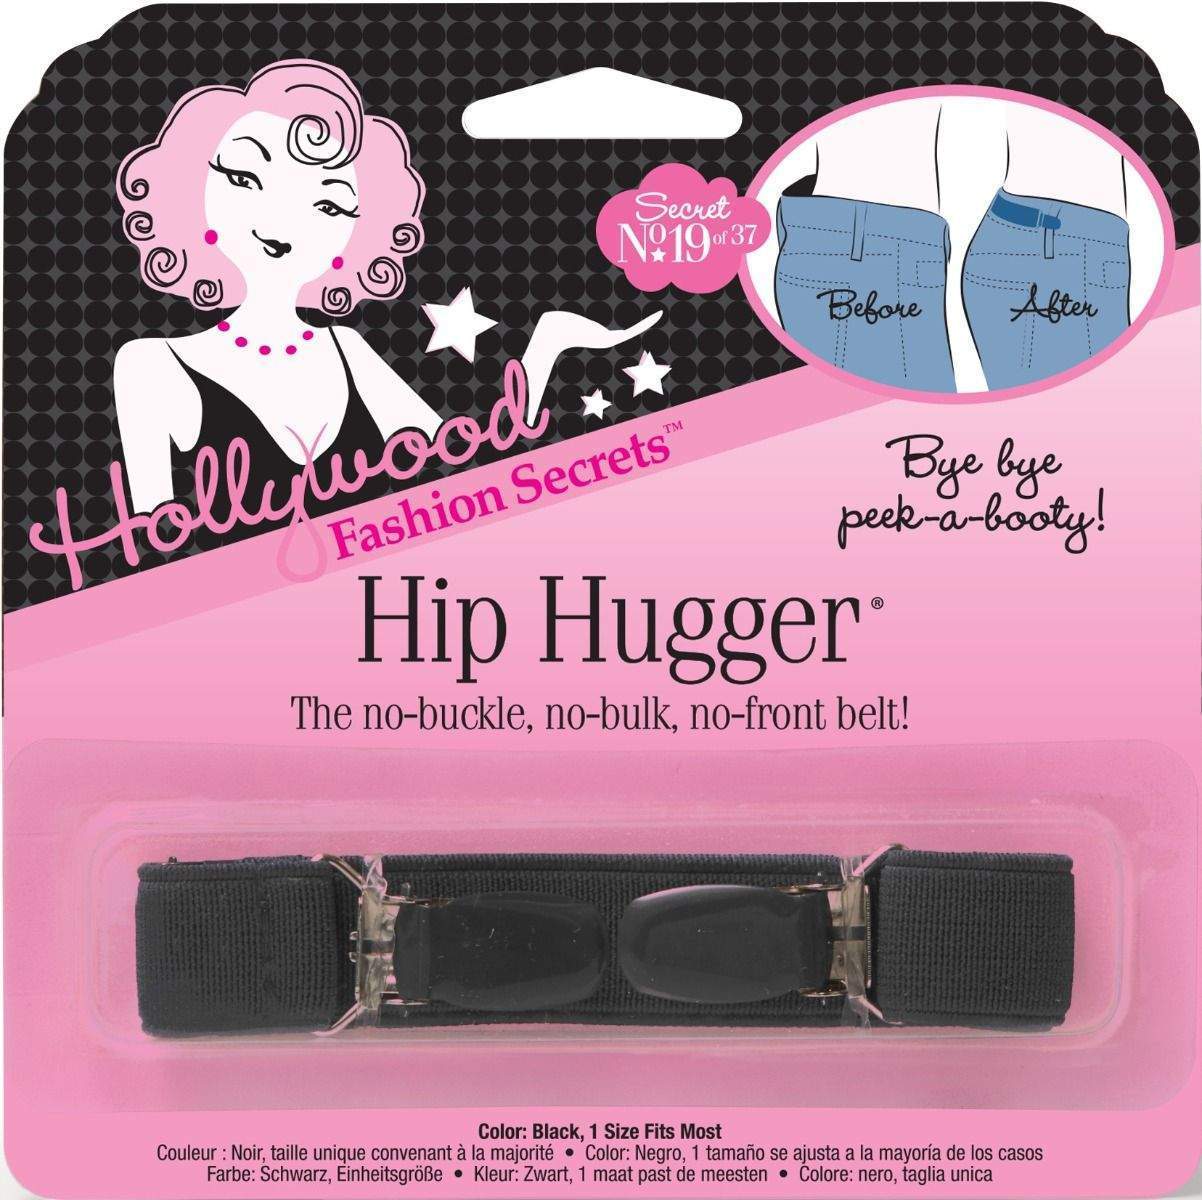 Hollywood Fashion Hip Hugger Belt-Hollywood Fashion Secrets-BB_Acessories,Brand_Hollywood Fashion,Brand_Hollywood Fashion Secrets,Collection_Bath and Body,Collection_Lifestyle,Life_Personal Care